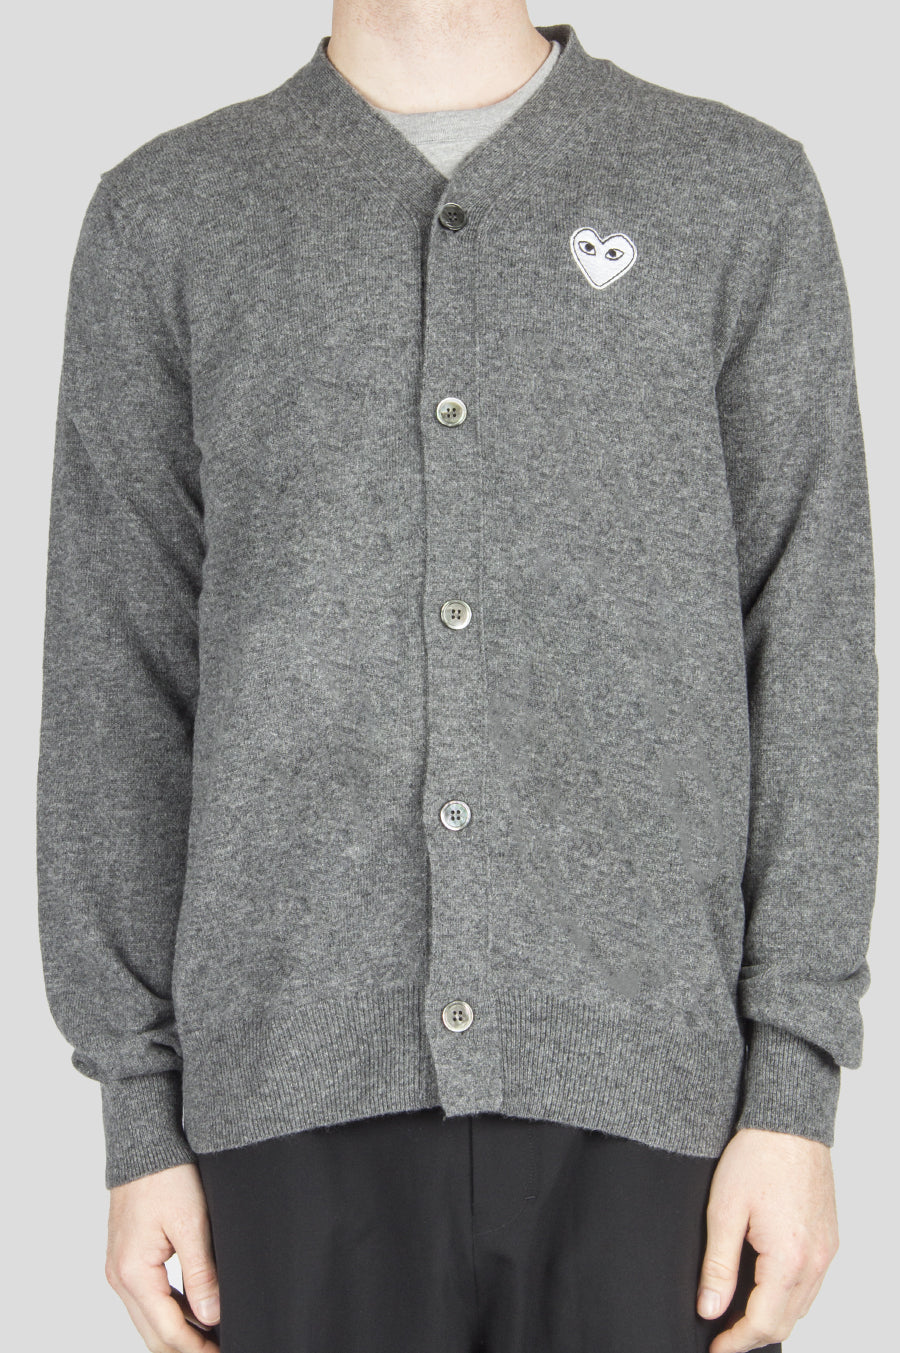 COMME DES GARCONS PLAY CARDIGAN GREY WHITE HEART - BLENDS